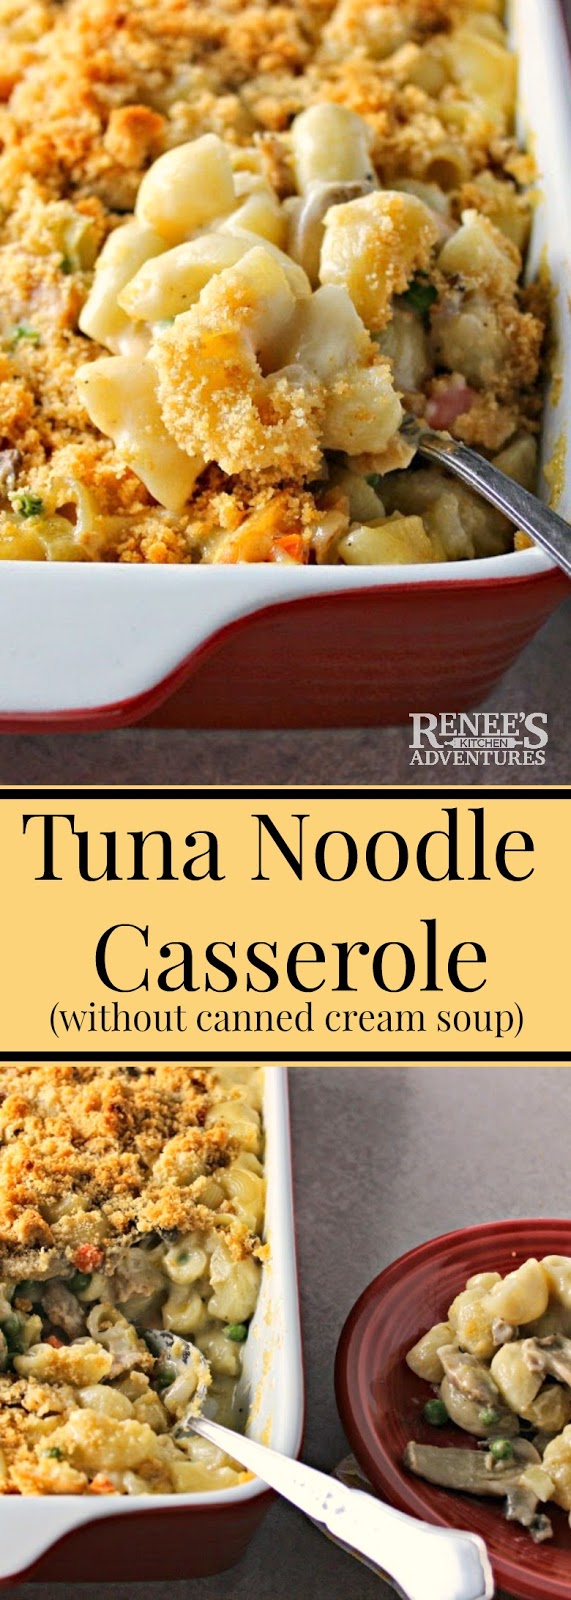 Lighter Cheesy Tuna Noodle Casserole (without Canned Cream Soup) | Renee's Kitchen Adventures - easy recipe for tuna noodle casserole made without cream of anything soup! Family recipe great for an easy dinner.